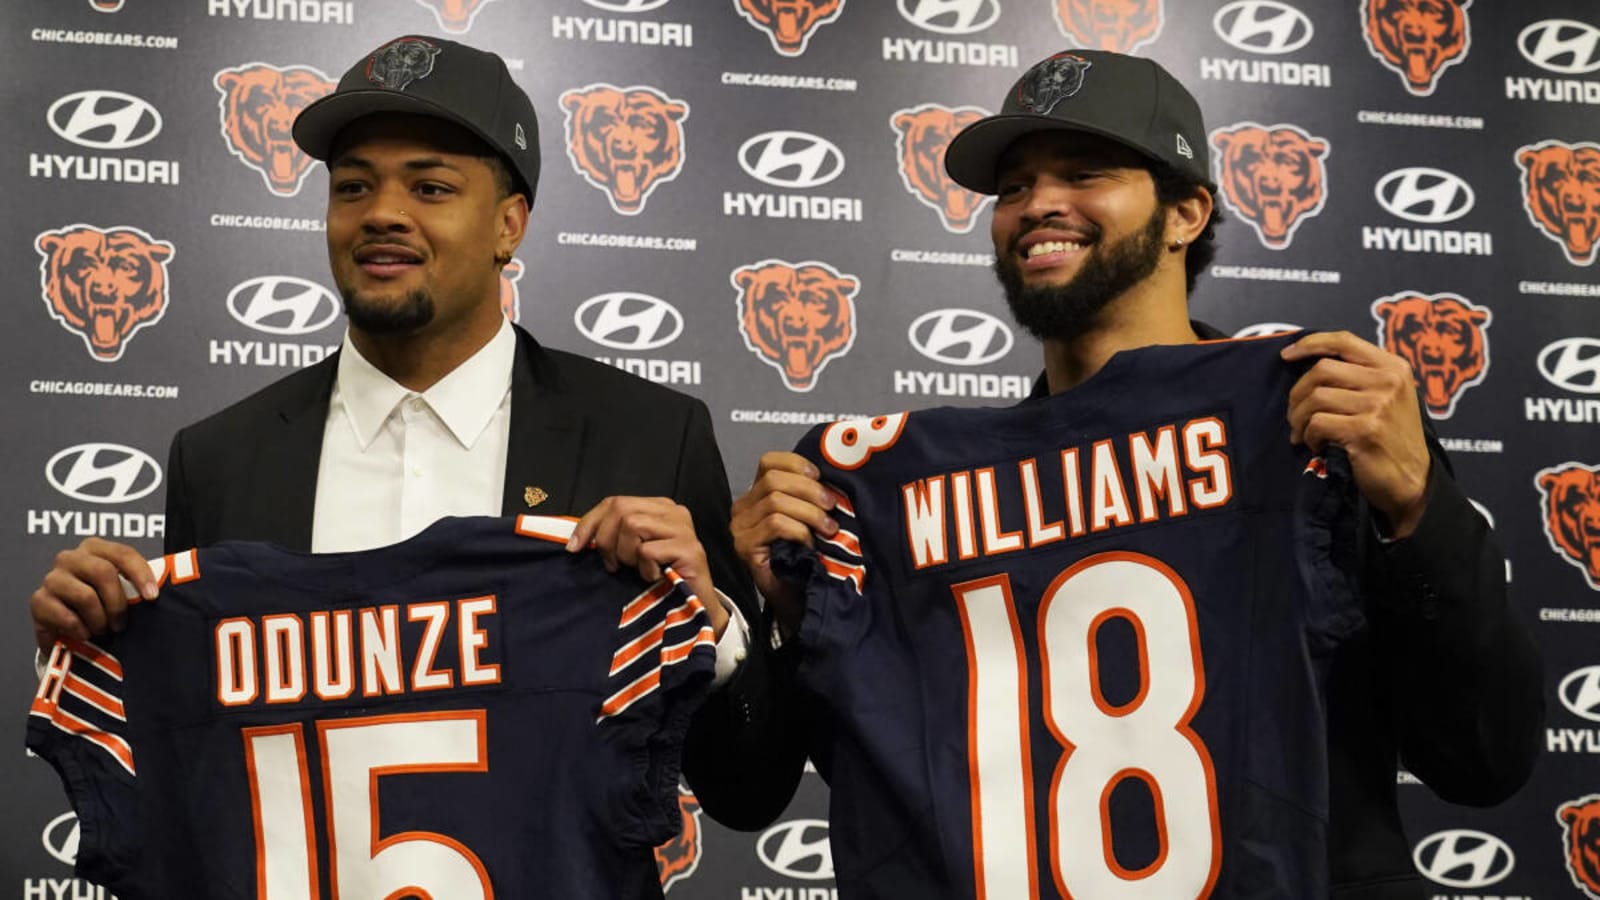 Chicago Bears will get their first look at Caleb Williams and the rest of the new rookies later this week